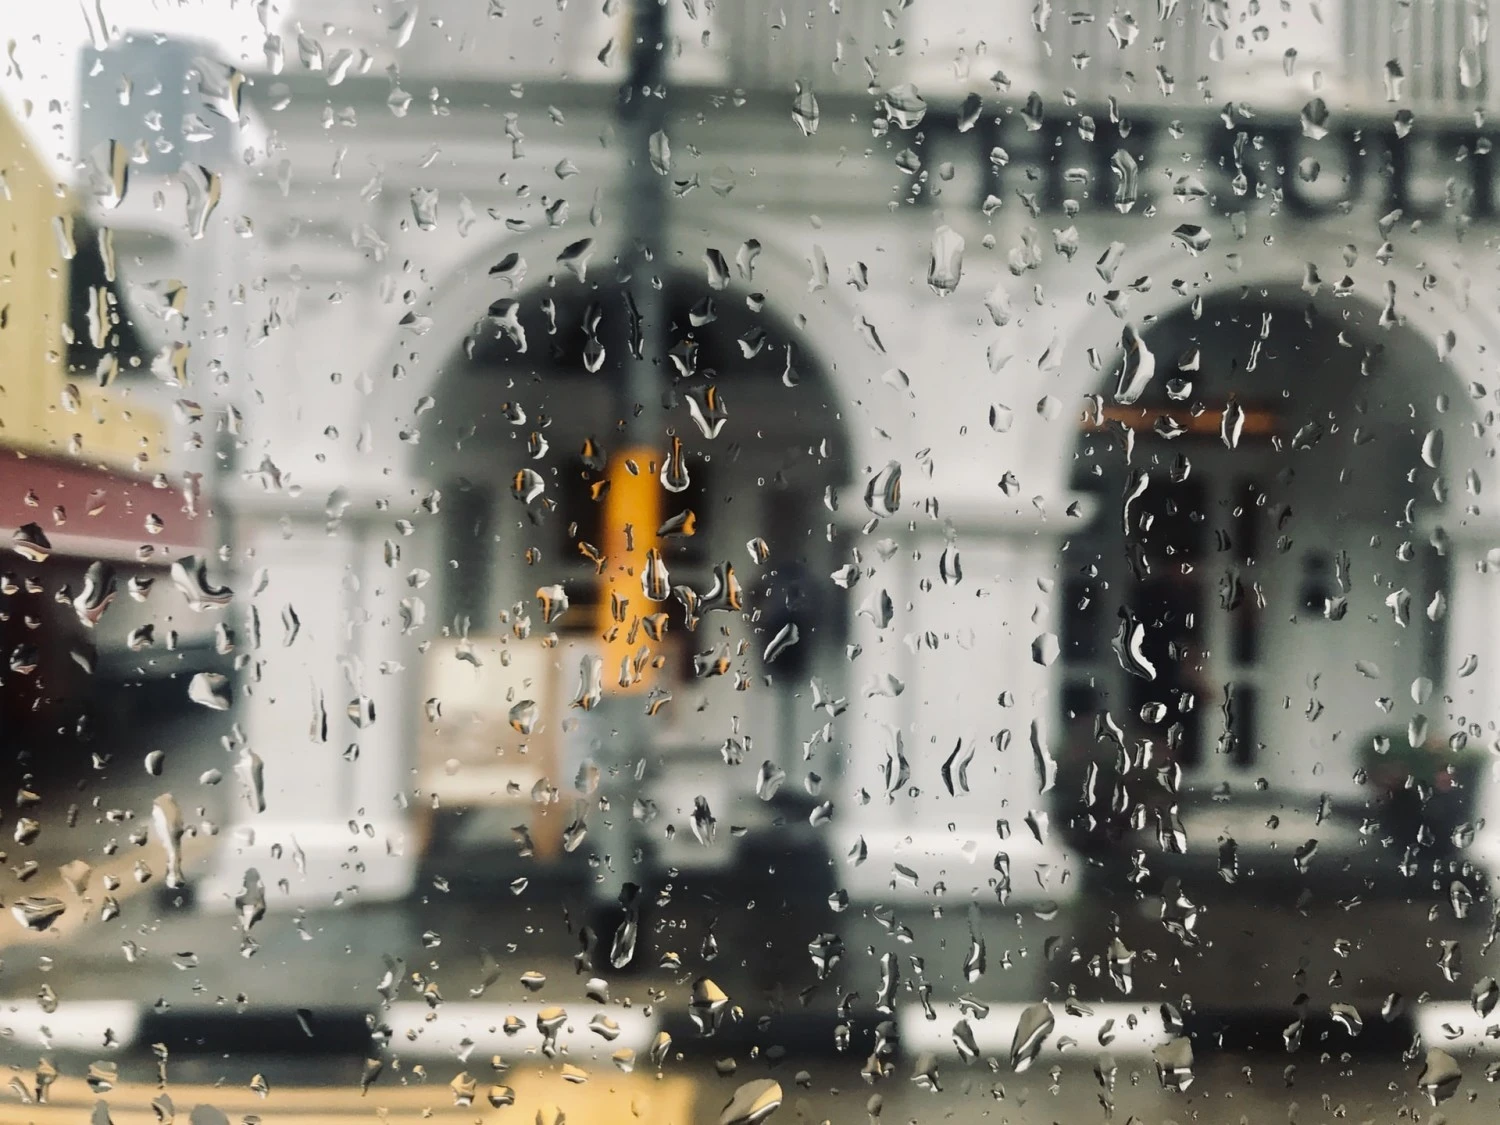 Tips for Moving on a Rainy Day